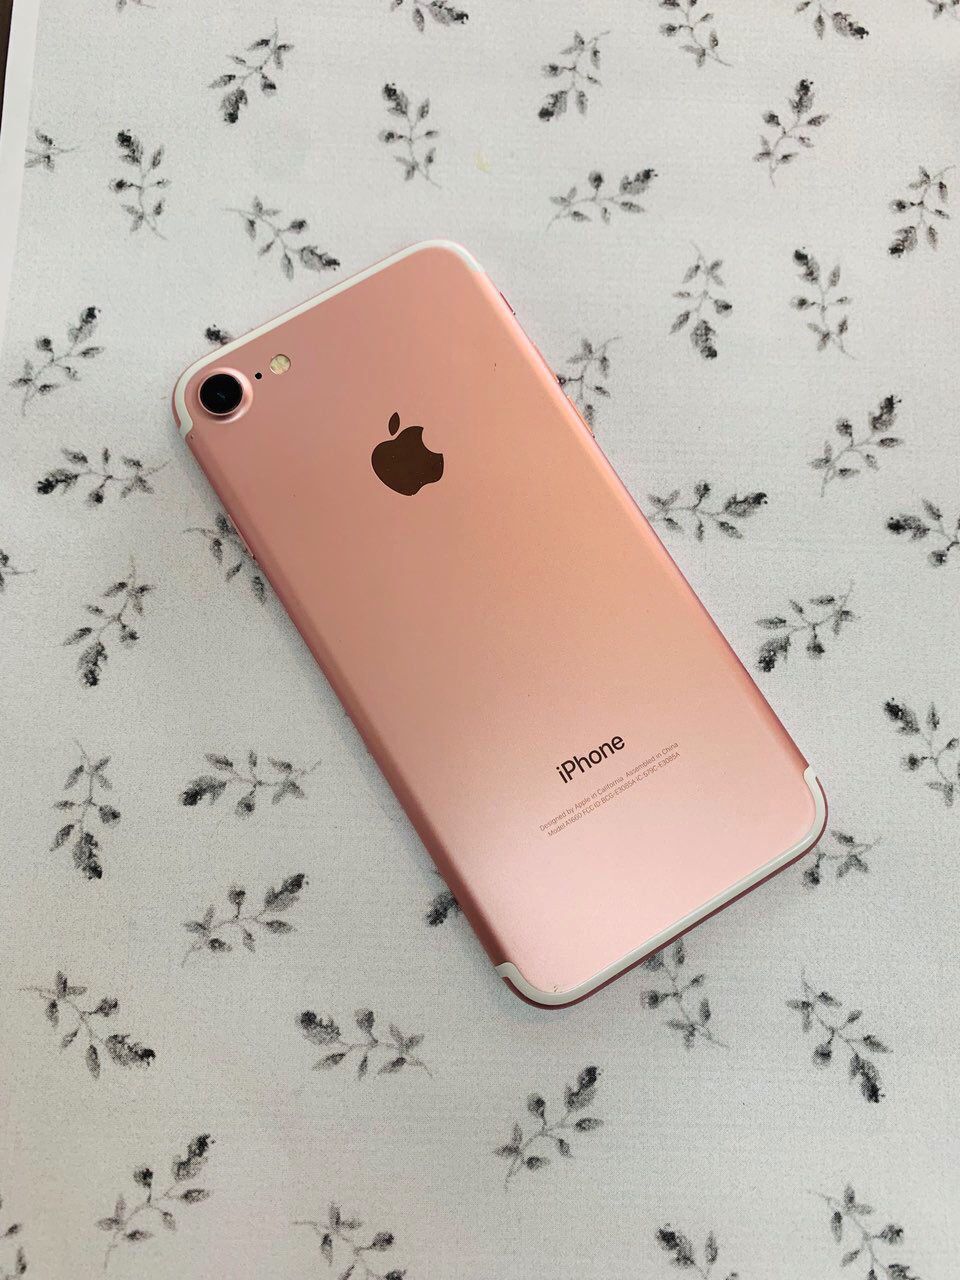 IPhone 7 (128 GB) Excellent Condition With Warranty